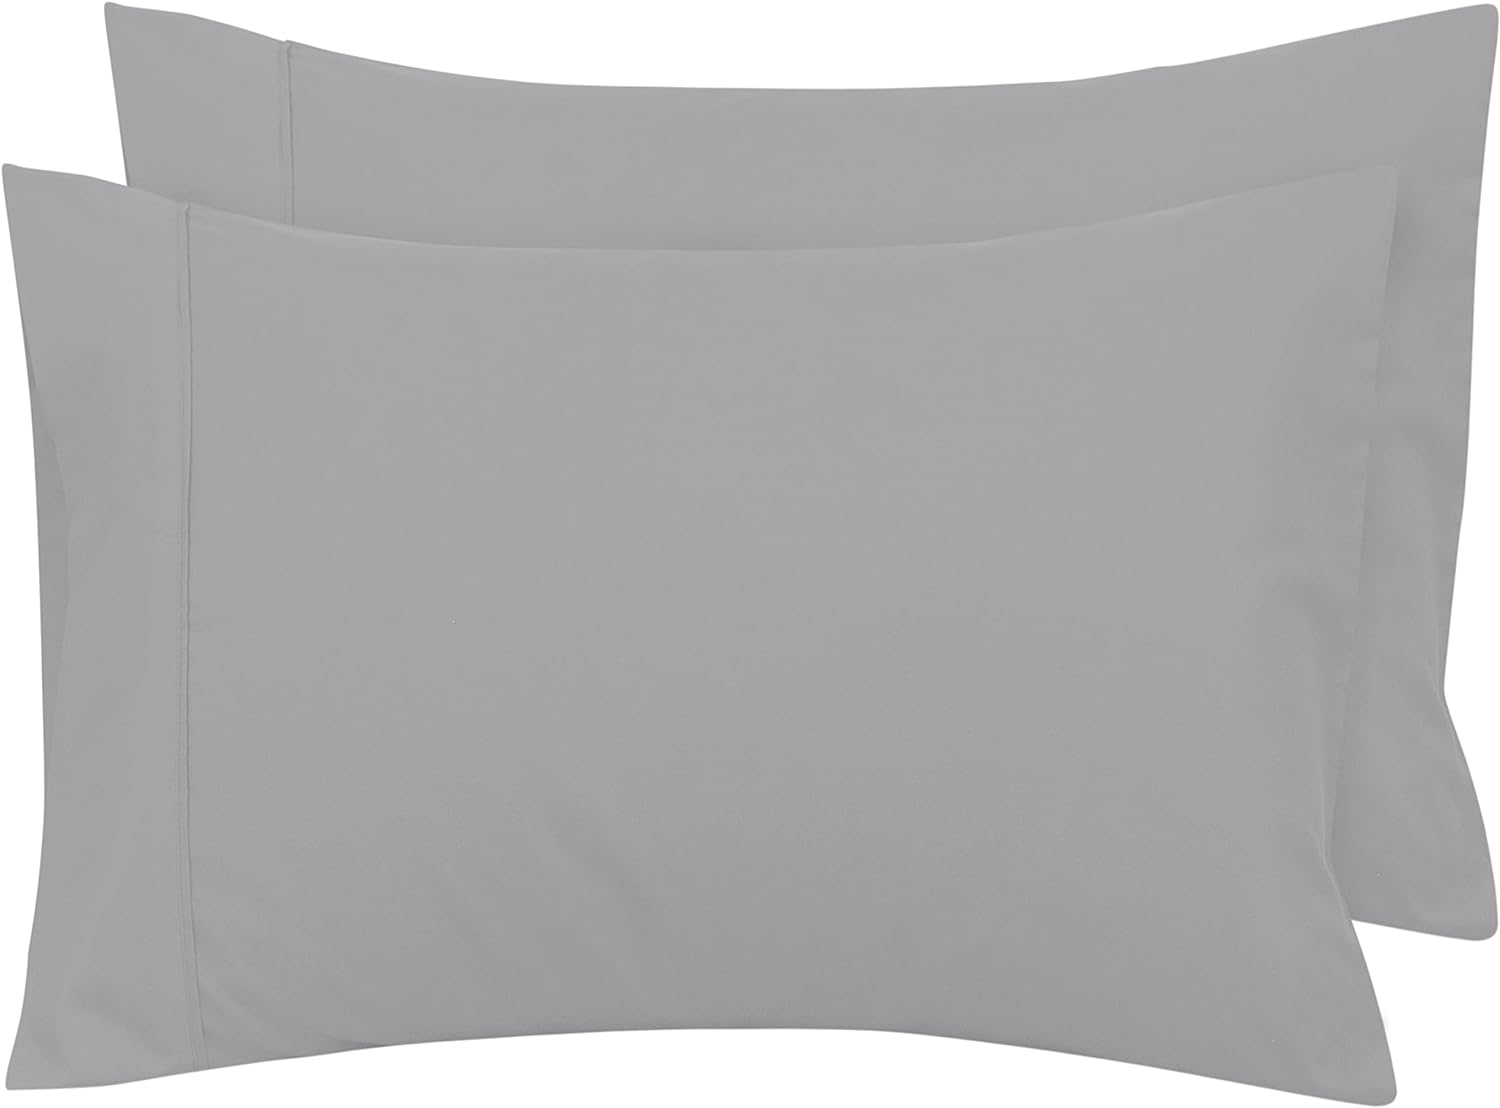 Royale Linens Queen Pillowcase Set of 2 - Bed Pillow Cover - 20" x 30" - Silver Pillowcases - 1800 Brushed Microfiber, Wrinkle & Fade Resistant - Soft & Cozy- Queen Size Pillow Case (Queen, Silver)